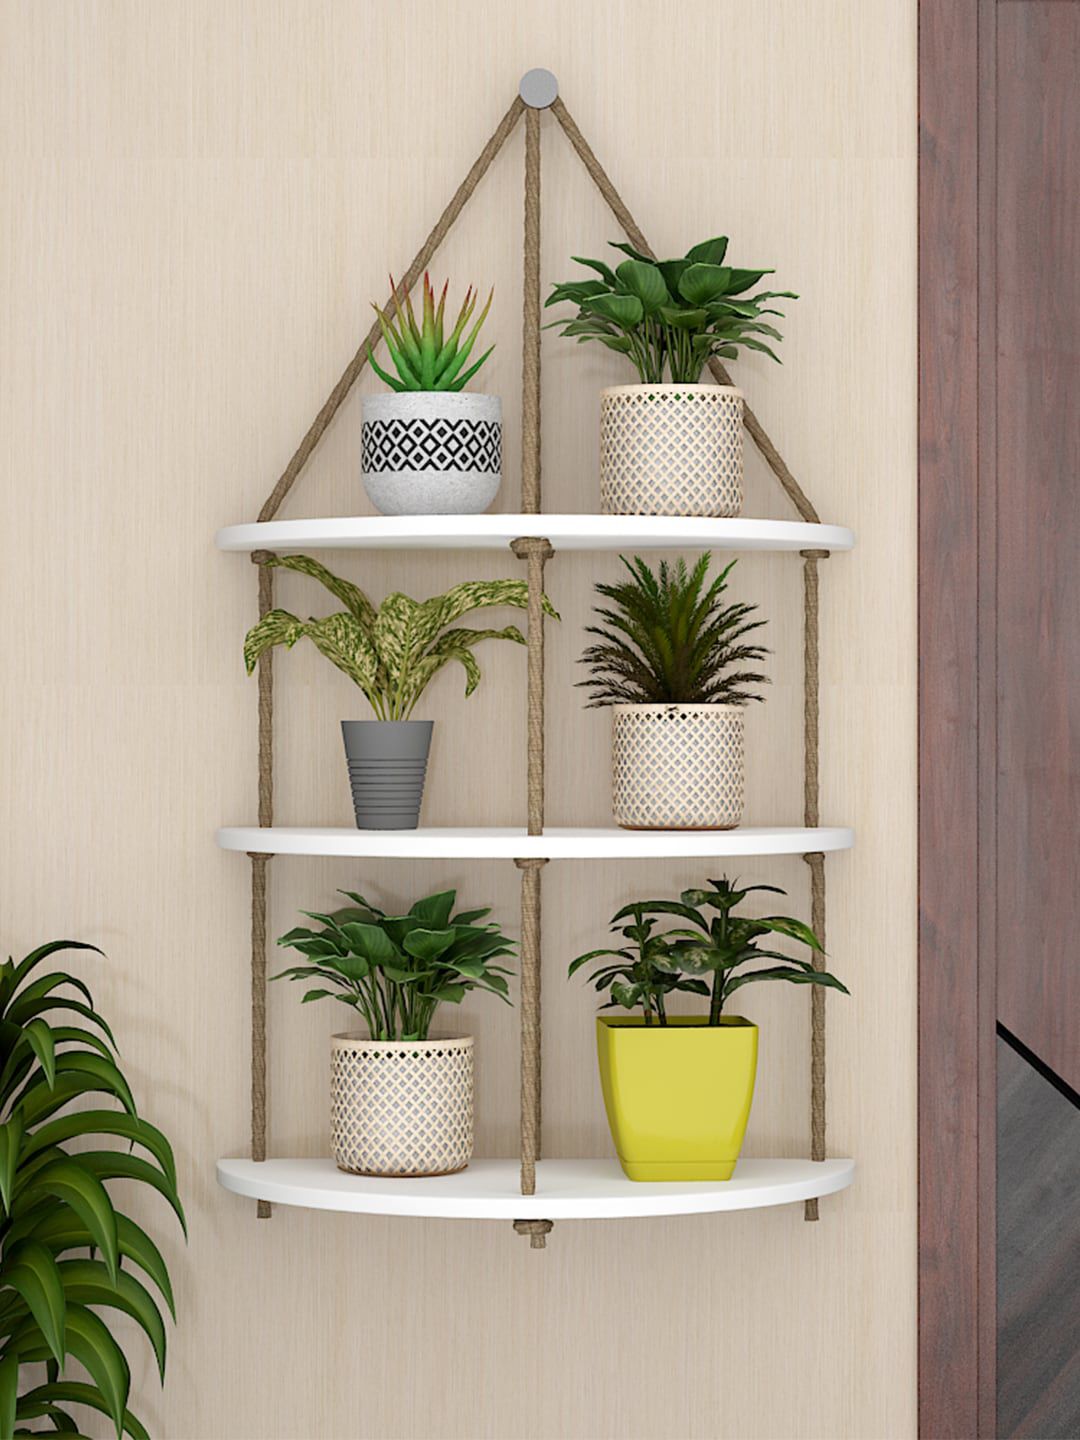 WALLMANTRA Unisex White Wooden Wall 3 Layers Hanging Planter Price in India